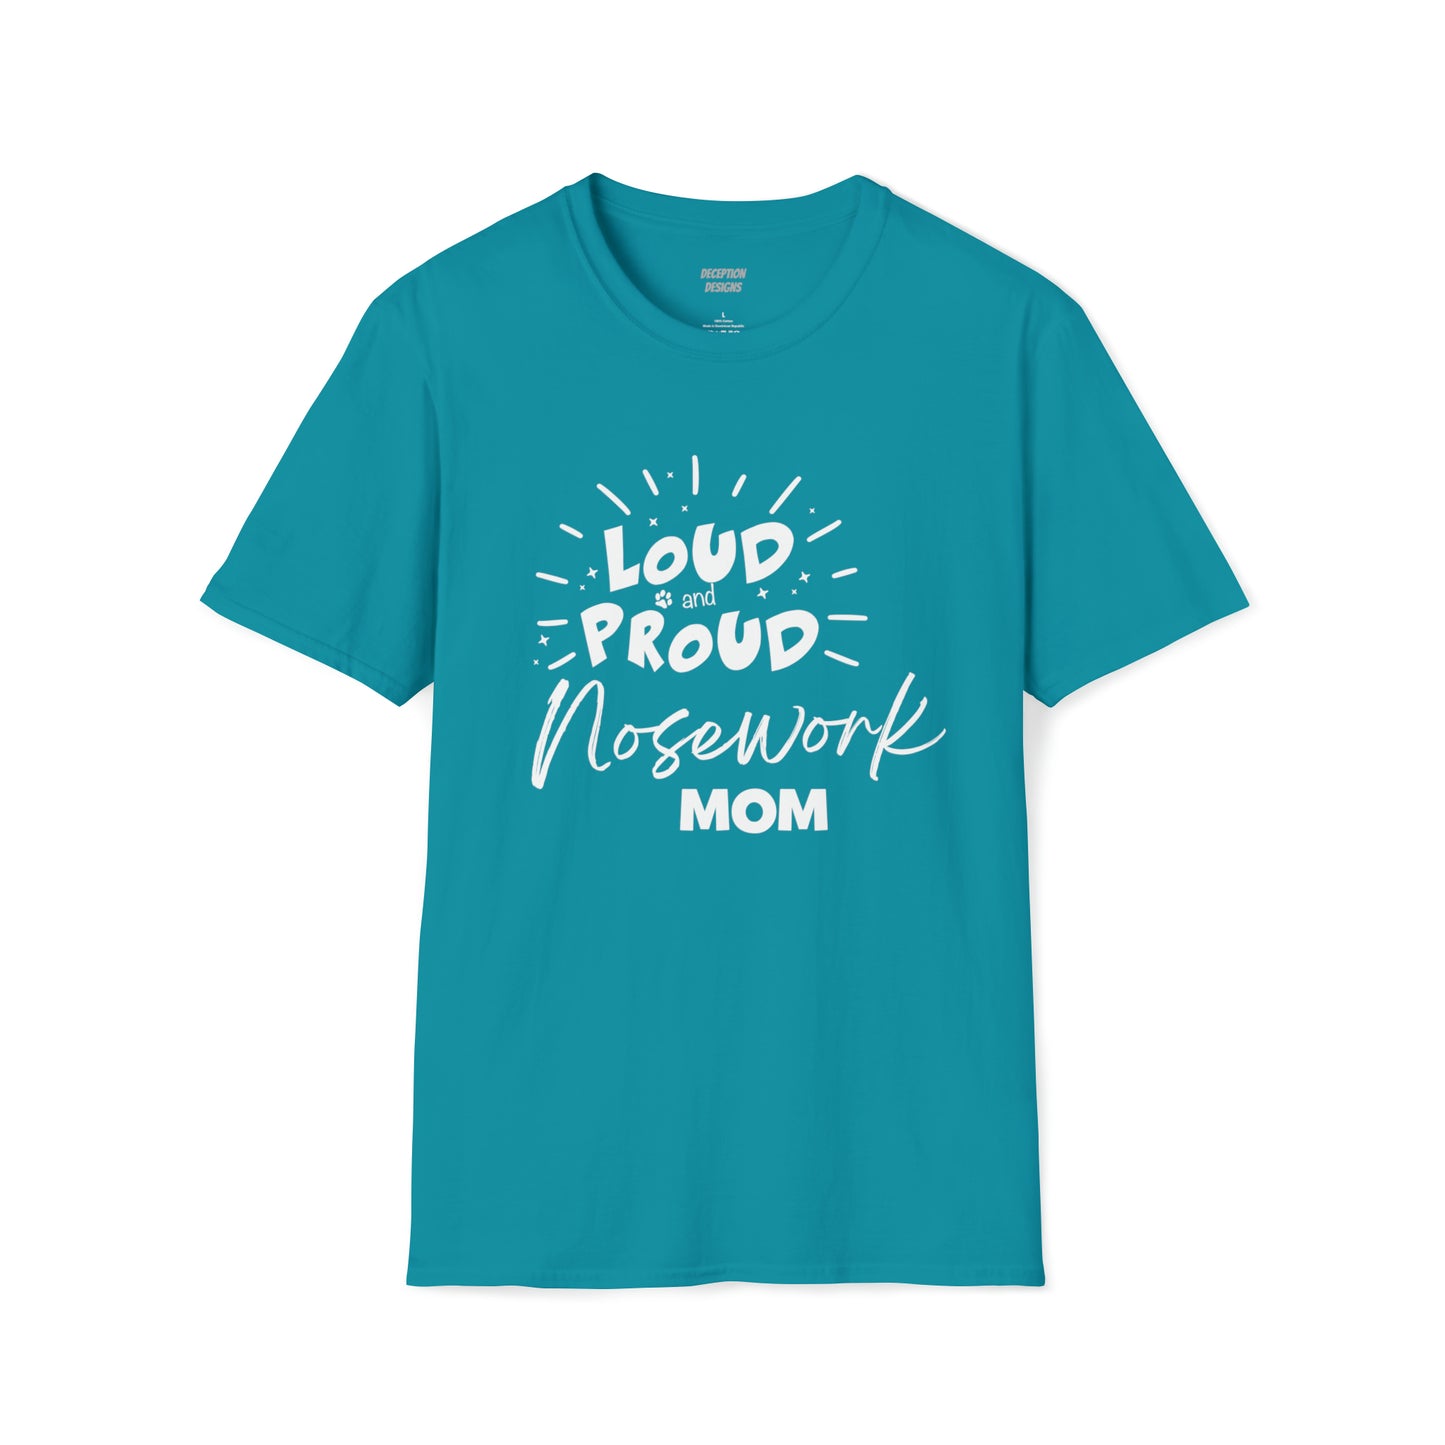 LOUD PROUD NOSEWORK MOM -  Unisex Softstyle T-Shirt